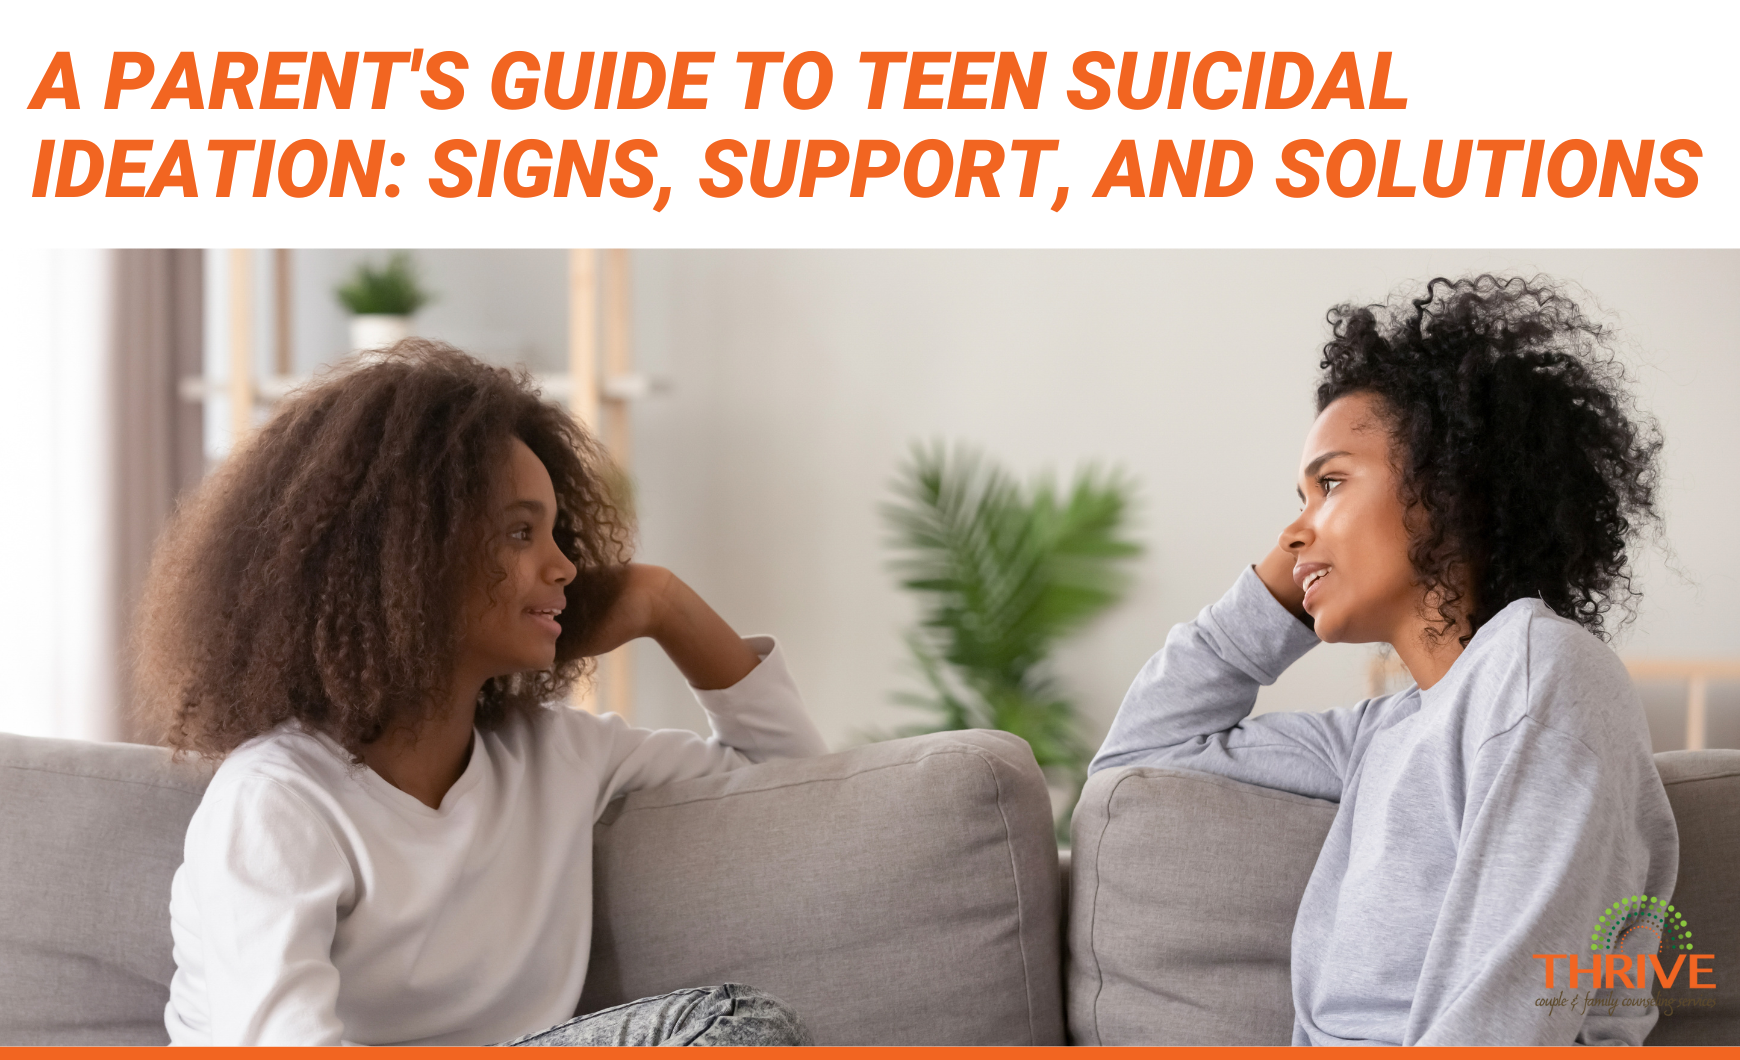 A Parent's Guide to Teen Suicidal Ideation Signs, Support, and Solutions